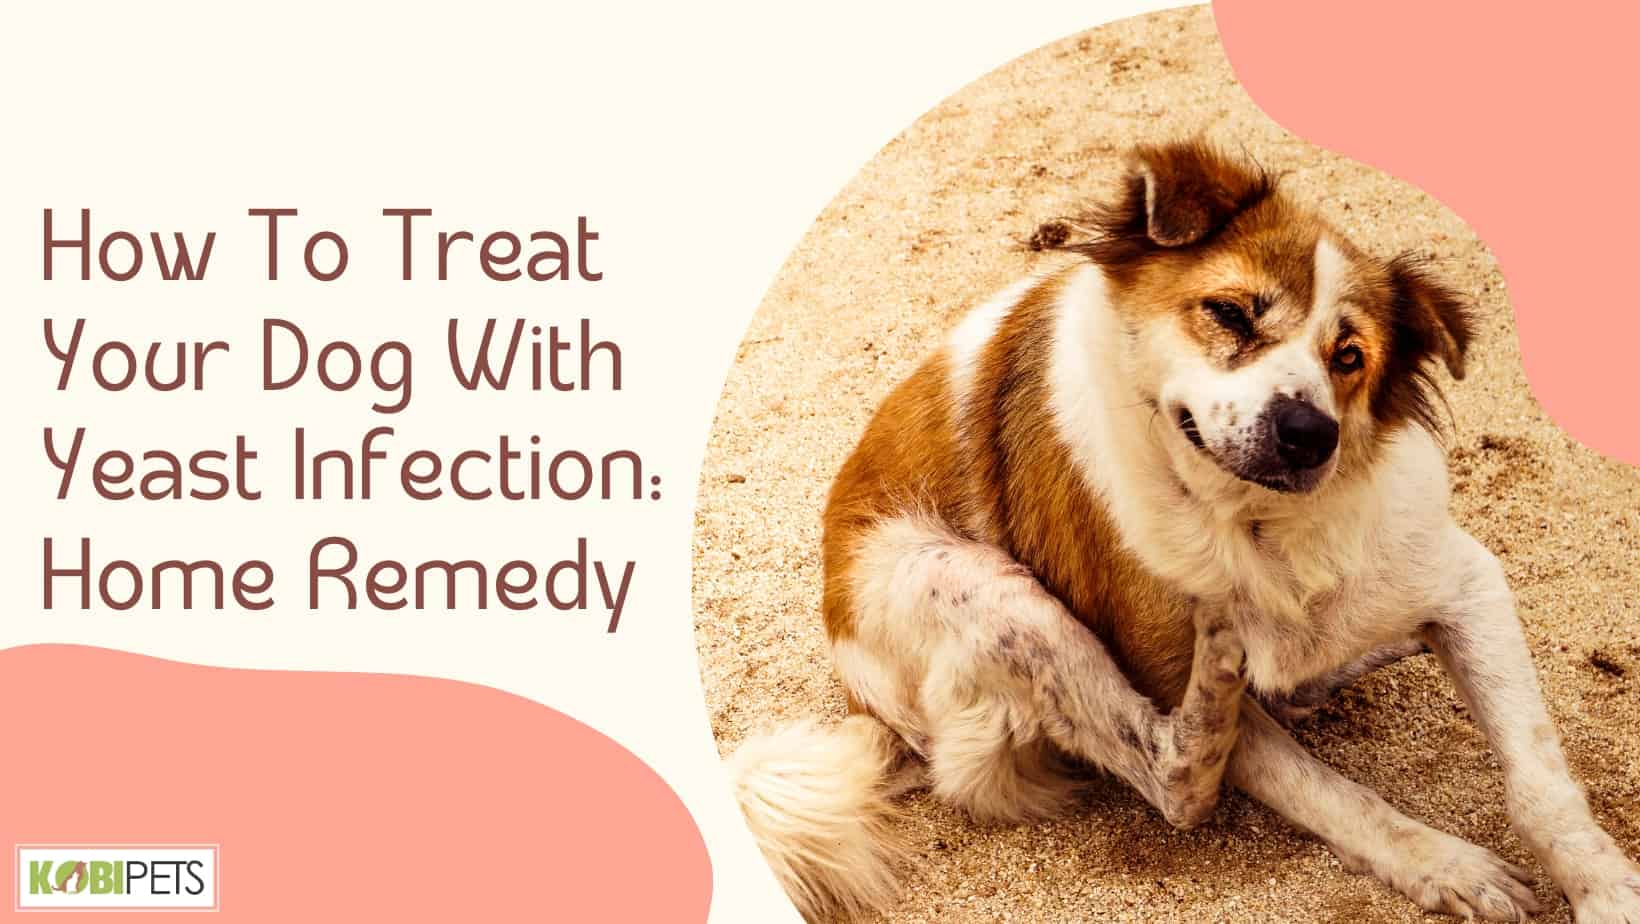 How To Treat Your Dog With Yeast Infection Home Remedy